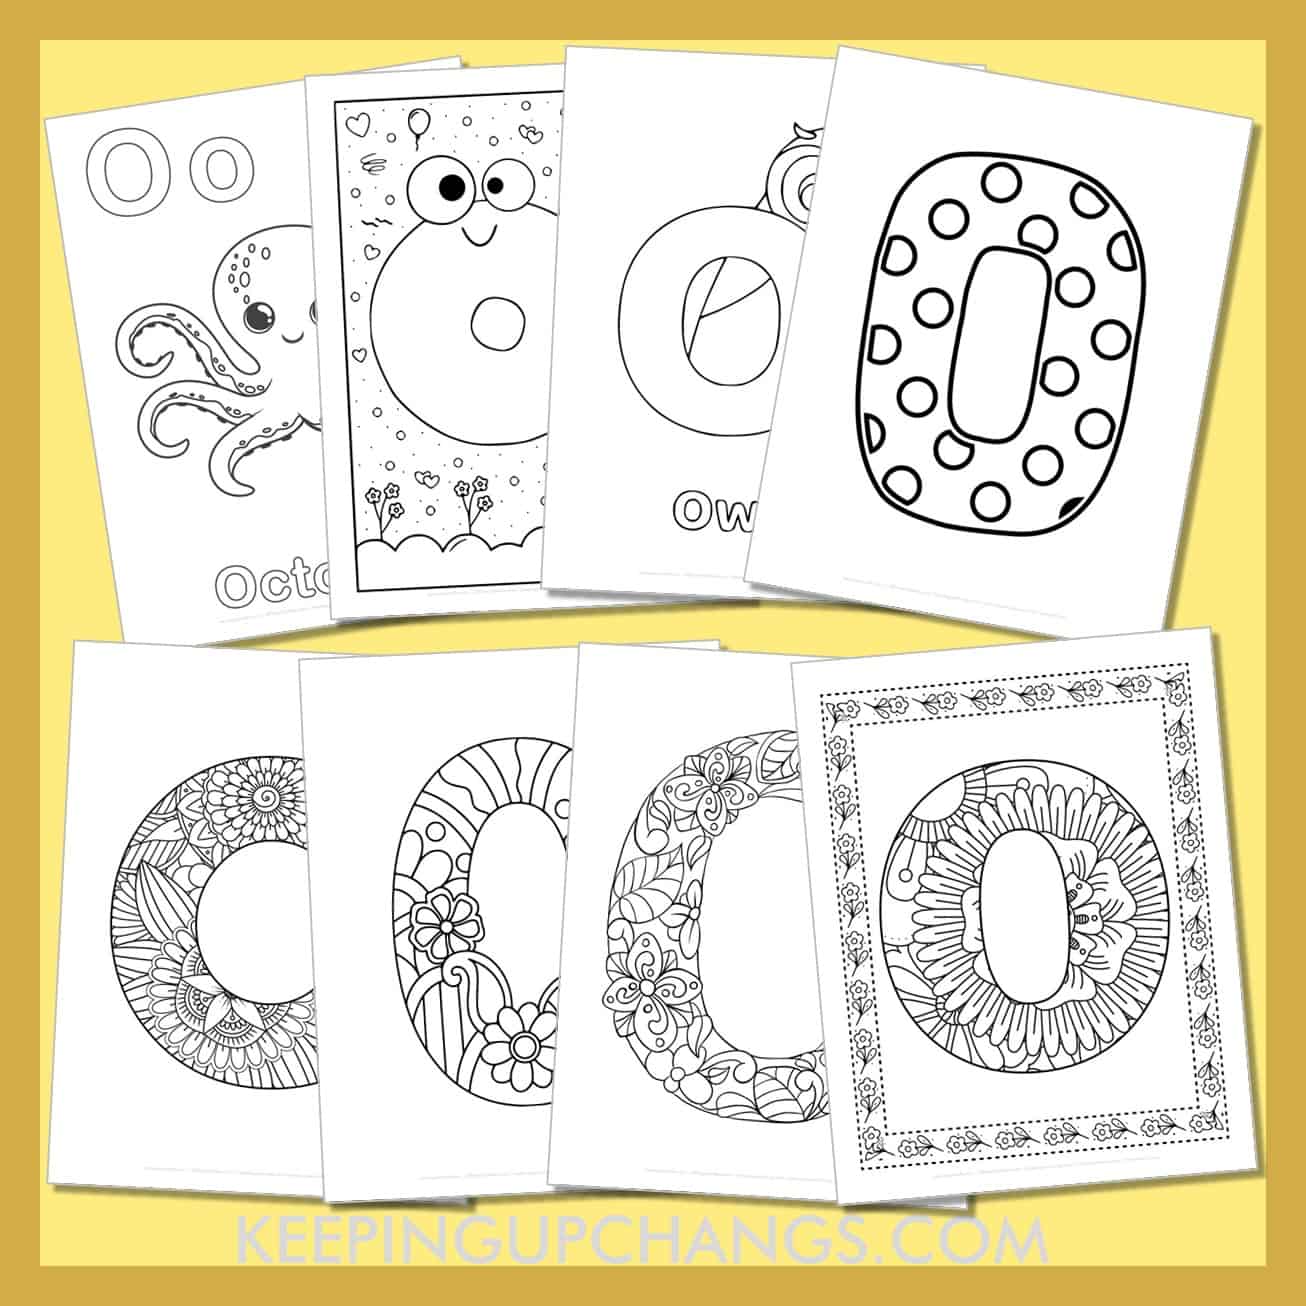 free alphabet letter o to color for toddlers, preschool, kindergarten, to adults.